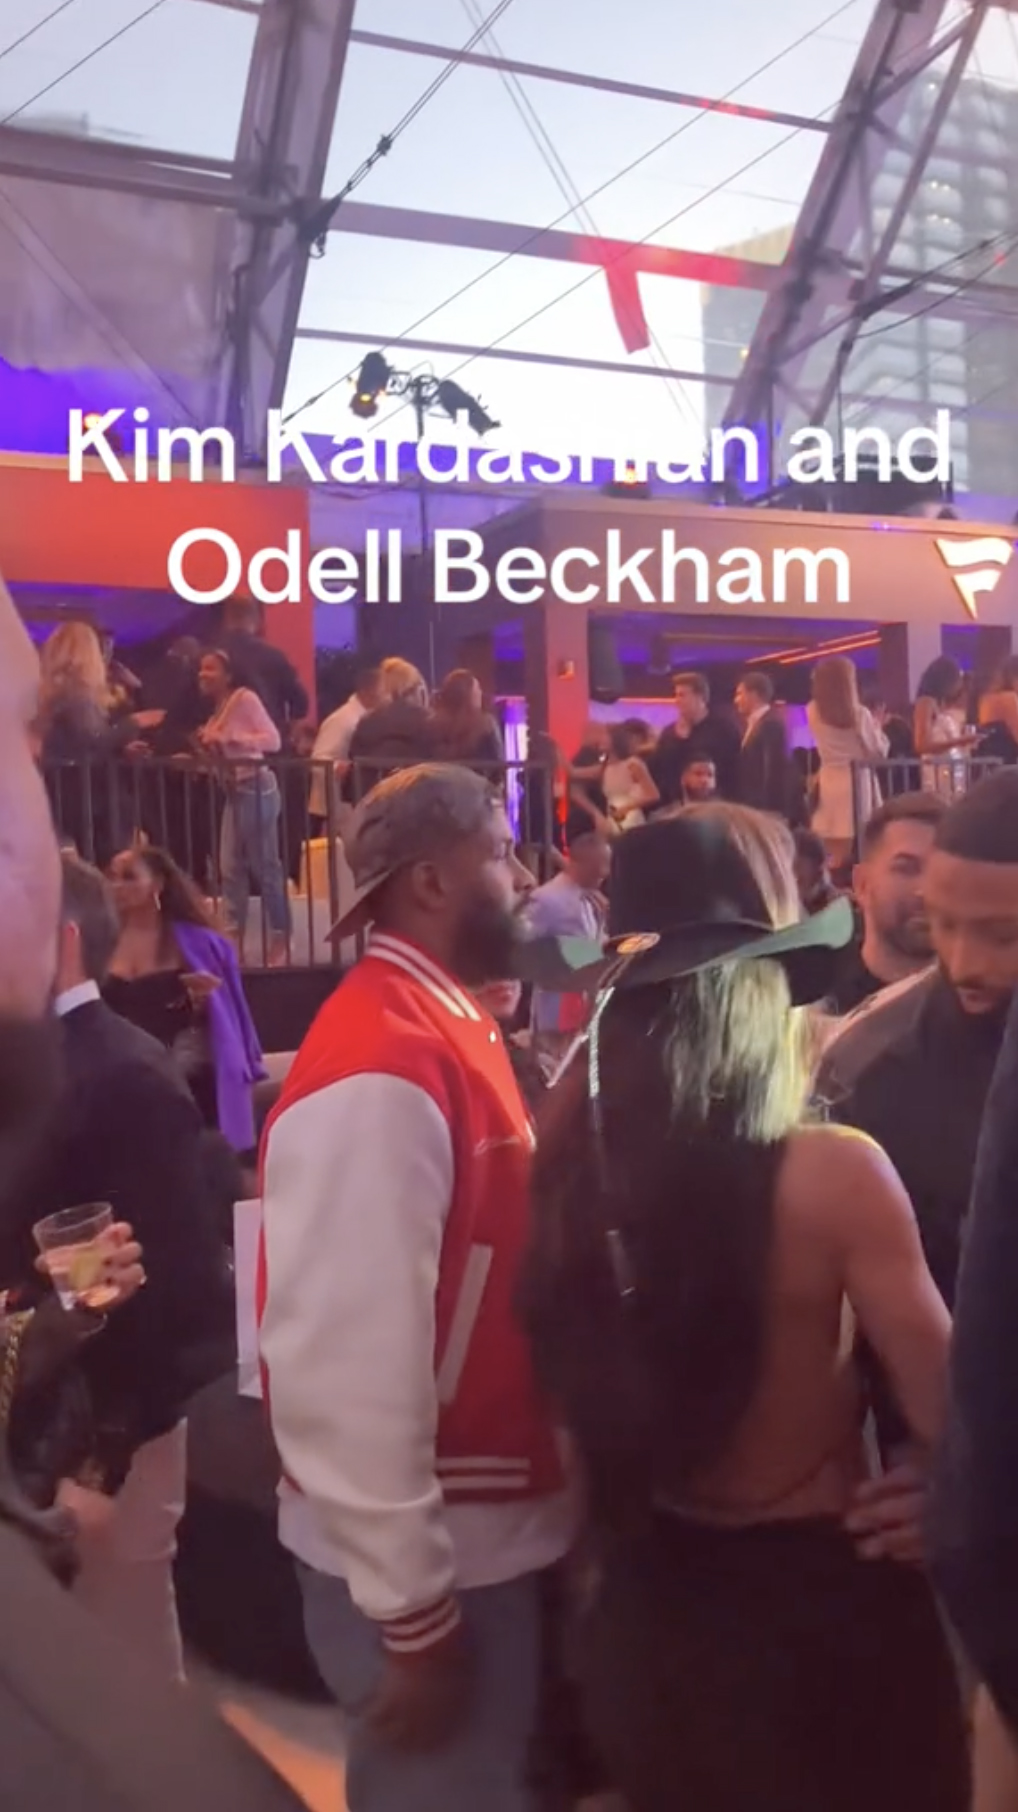 Fans online dubbed Kim and Odell's interaction as 'awkward'